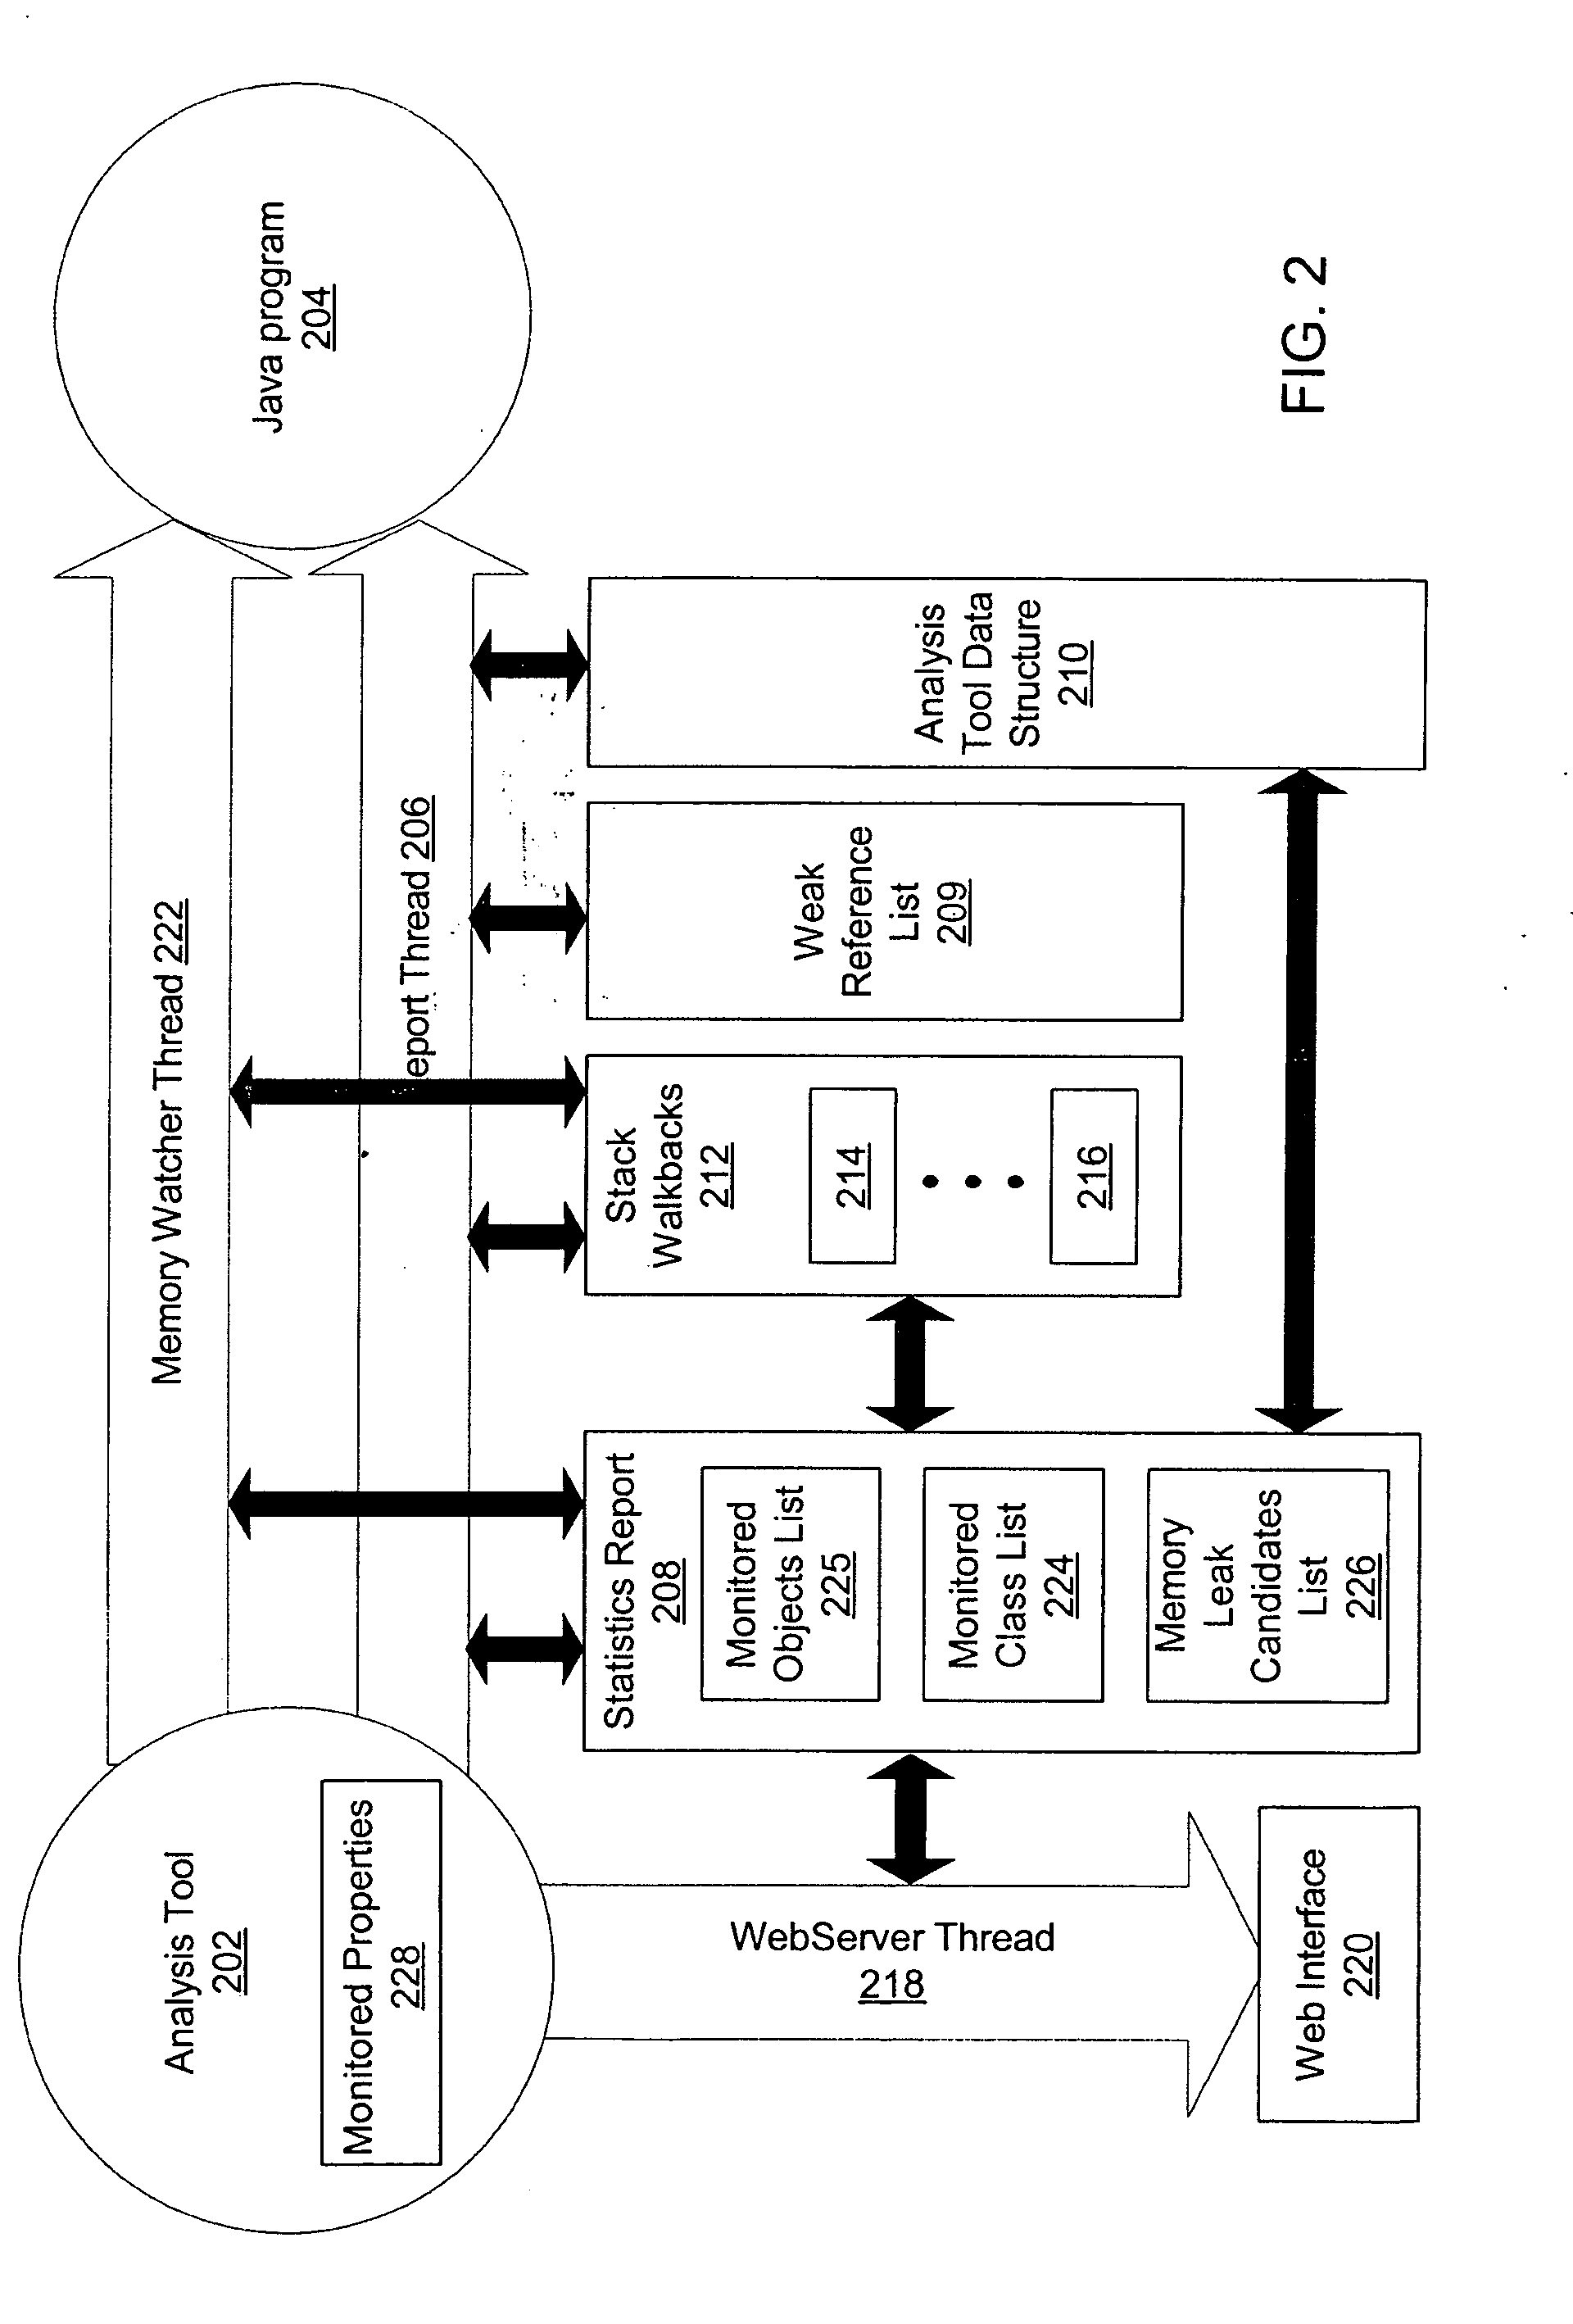 Method, system and article for detecting critical memory leaks causing out-of-memory errors in Java software